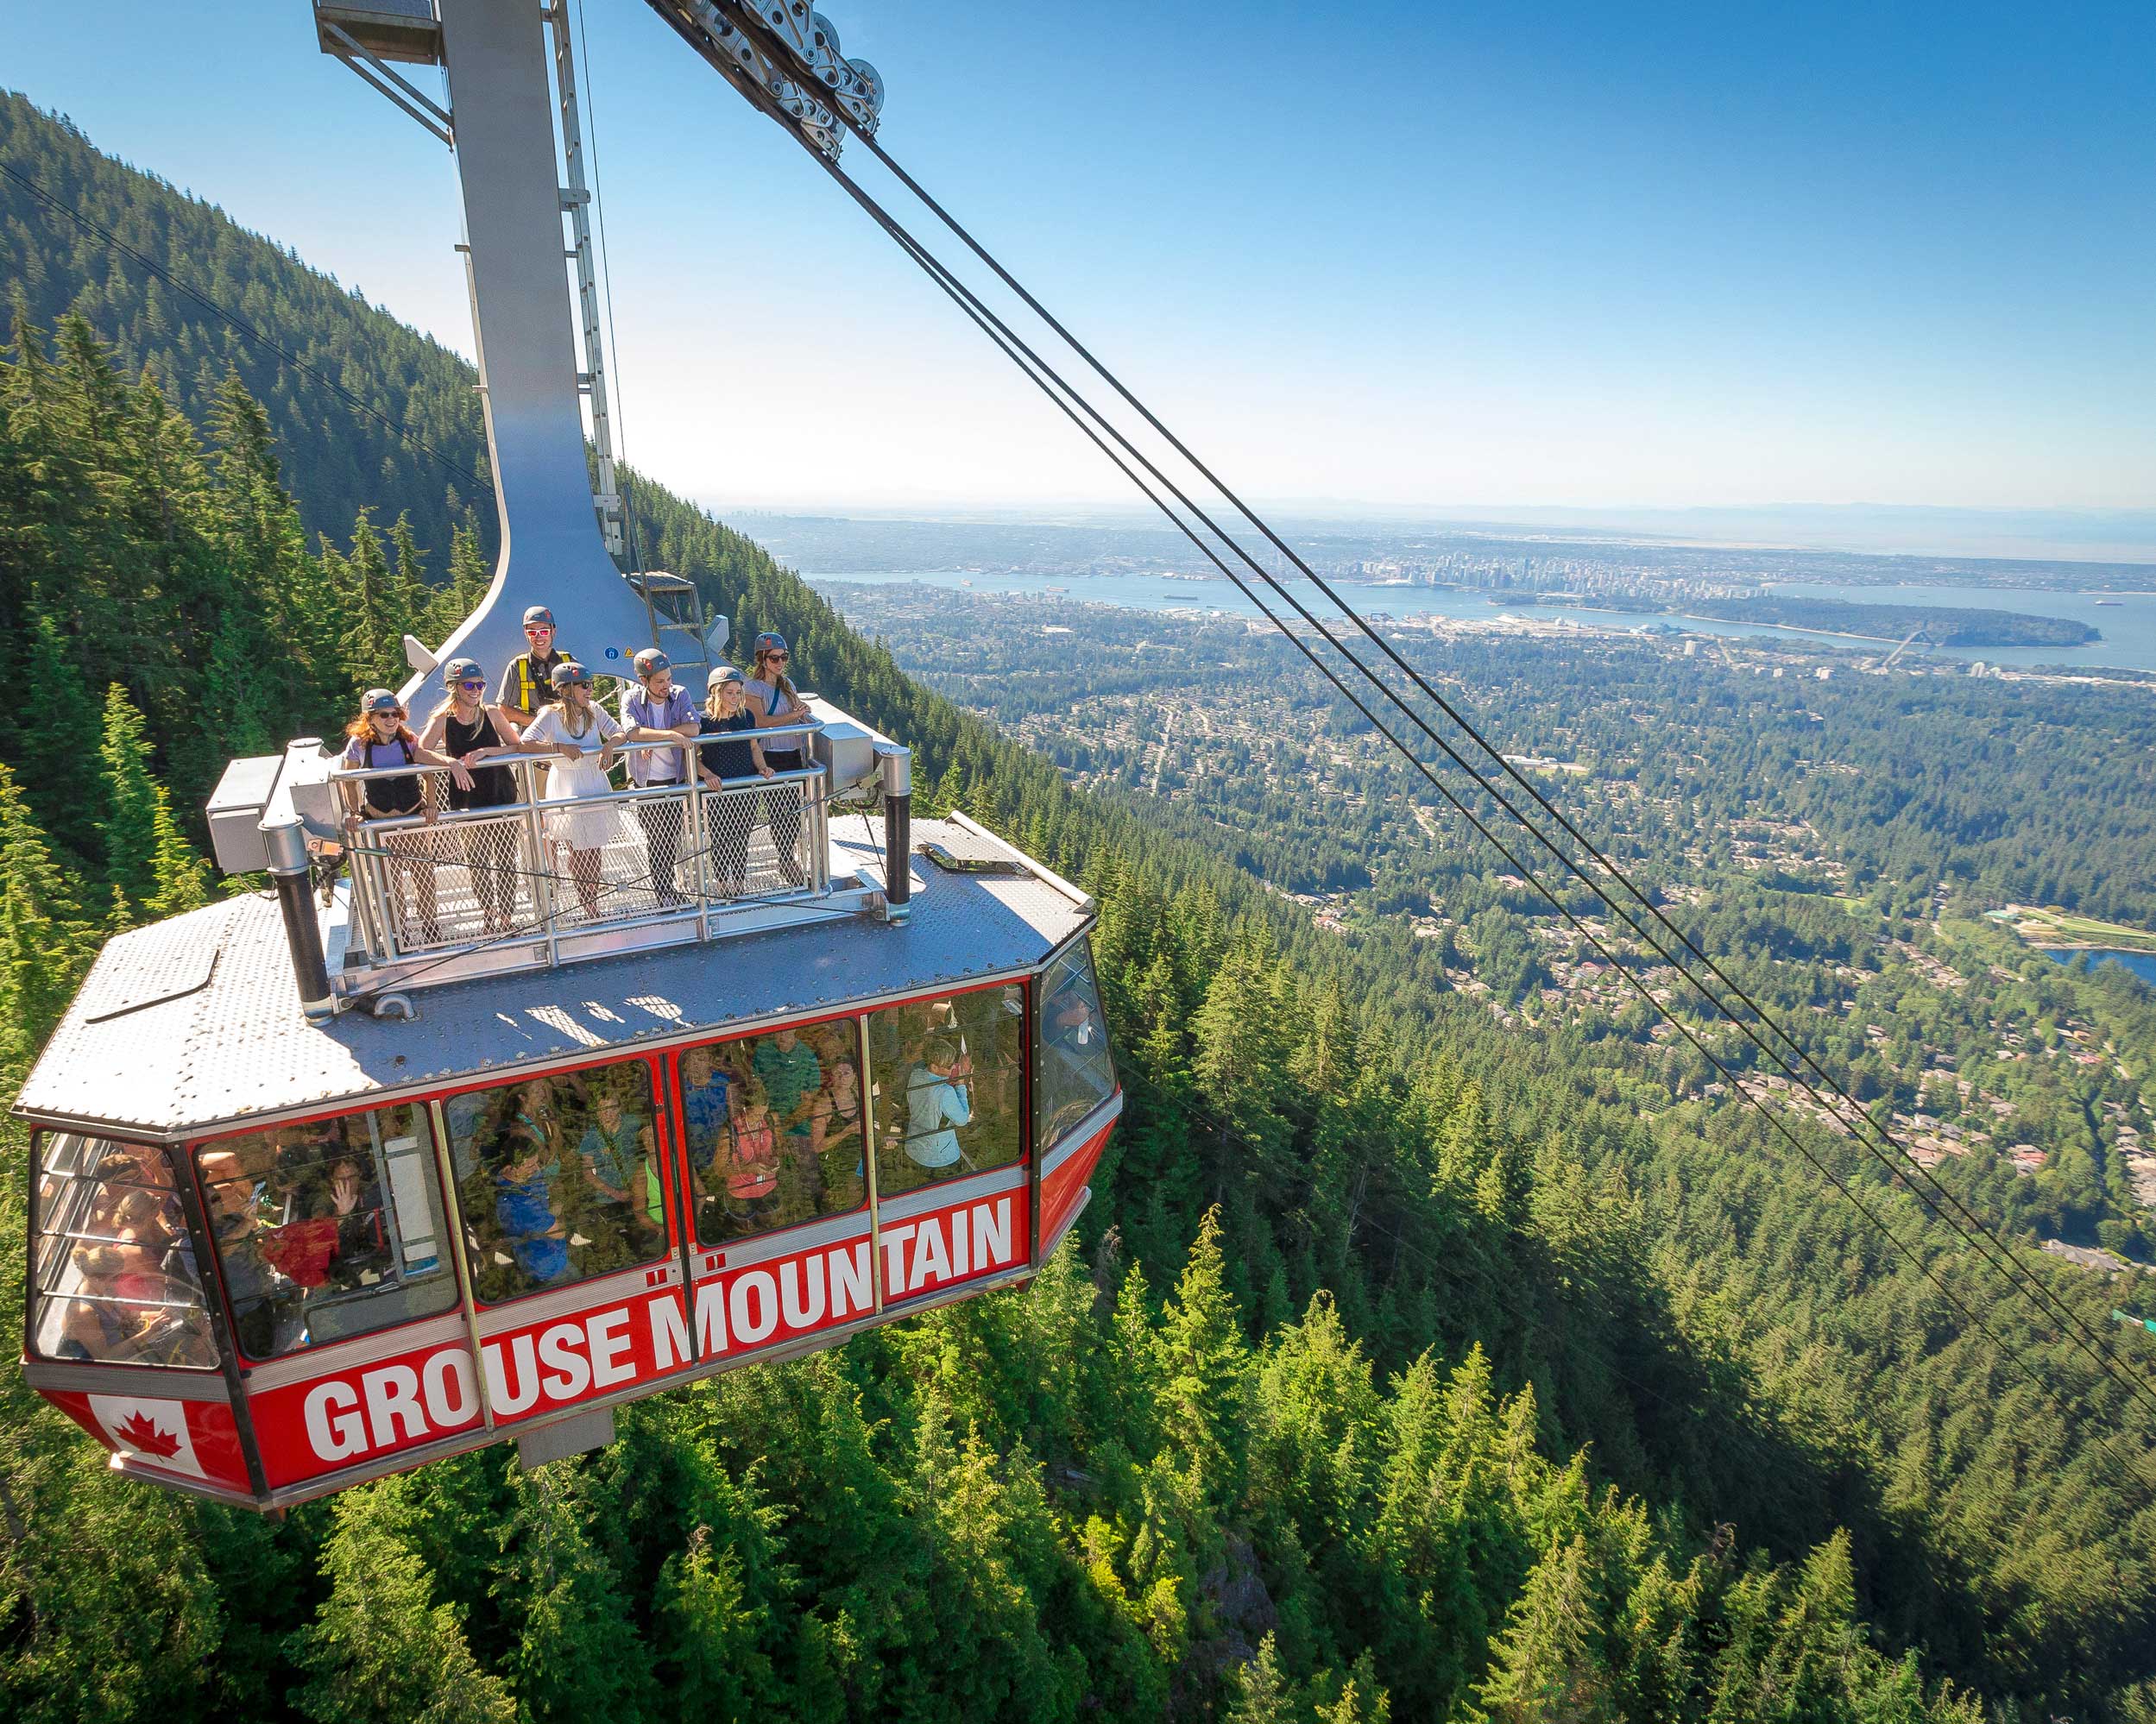 Vancouver vacations: Grouse Mountain gondola ascending above Vancouver.